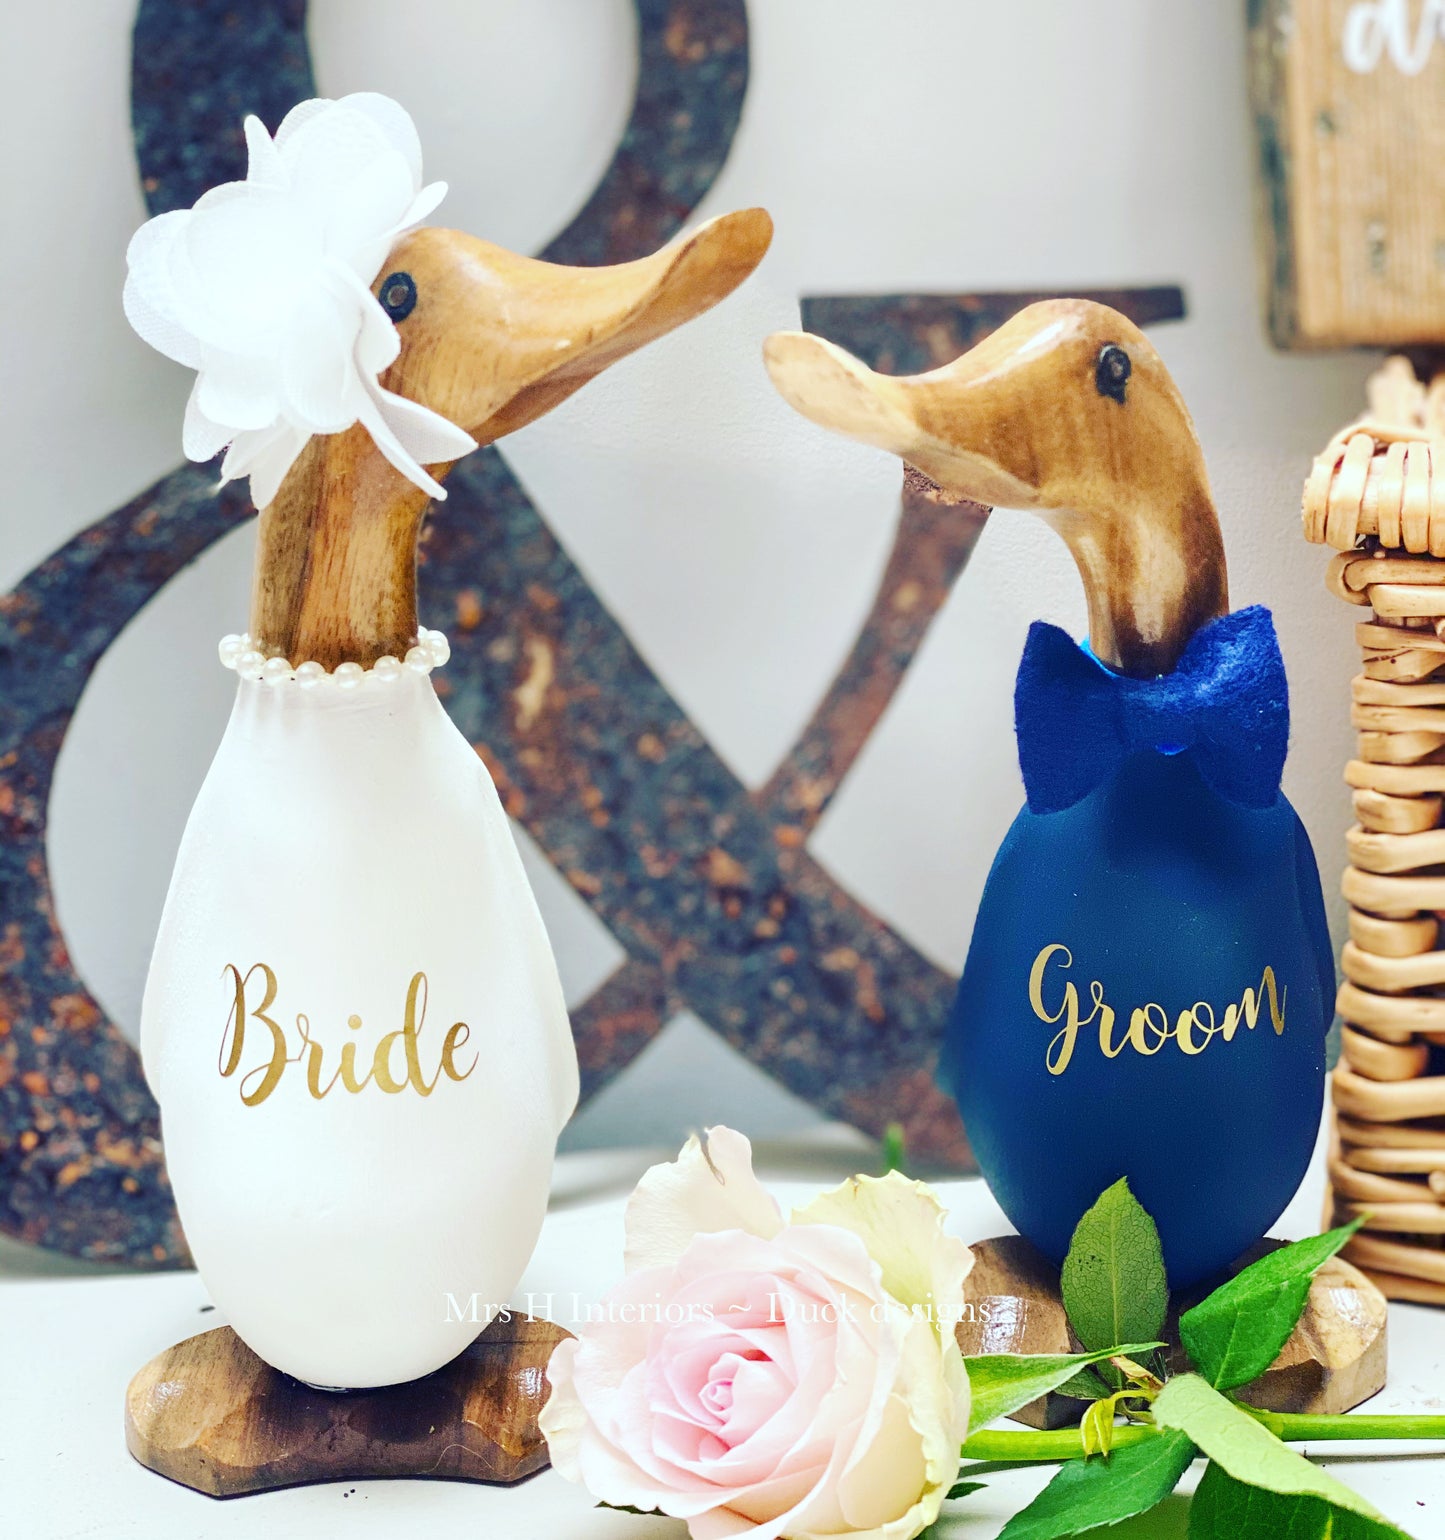 Bridal Couple - Wedding Pair Ducklets - Decorated Wooden Duck in Boots by Mrs H the Duck Lady